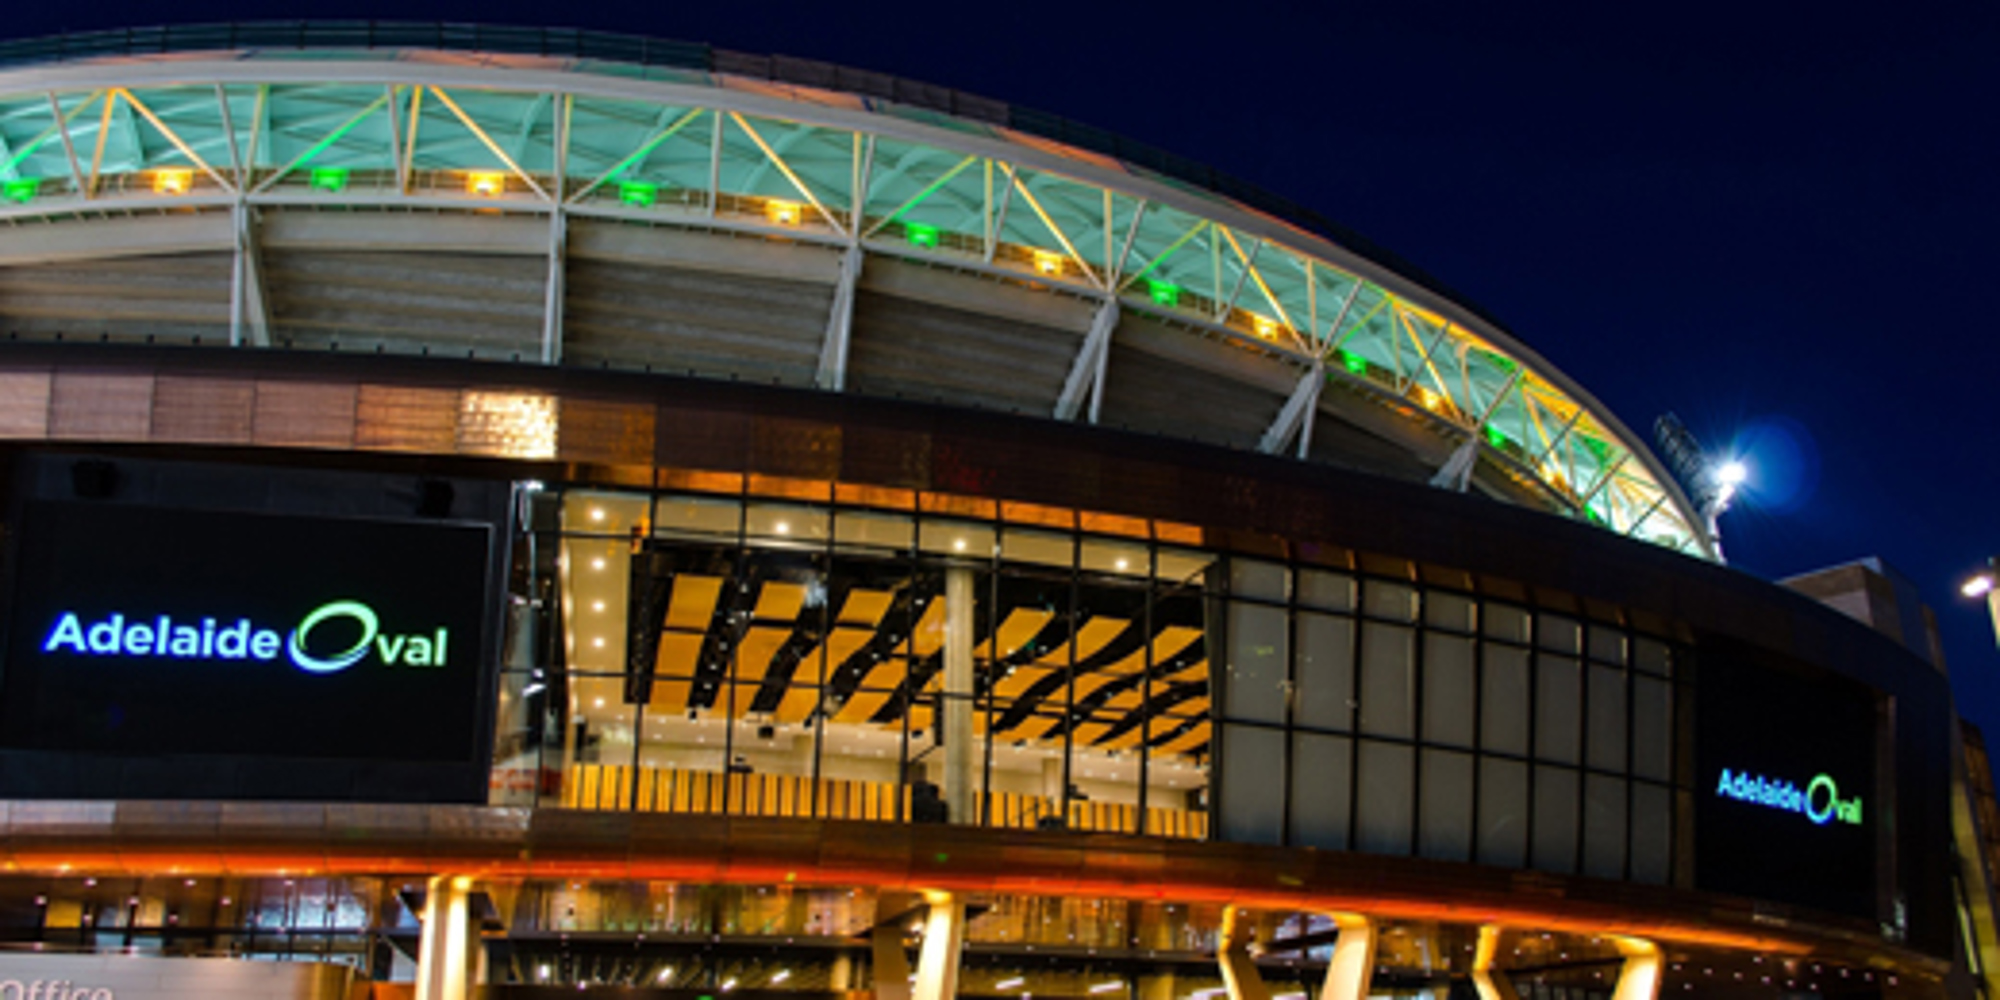 IHEA Healthcare Facilities Management Conference 2016 (Oct. 19-21), Adelaide Oval, Australia